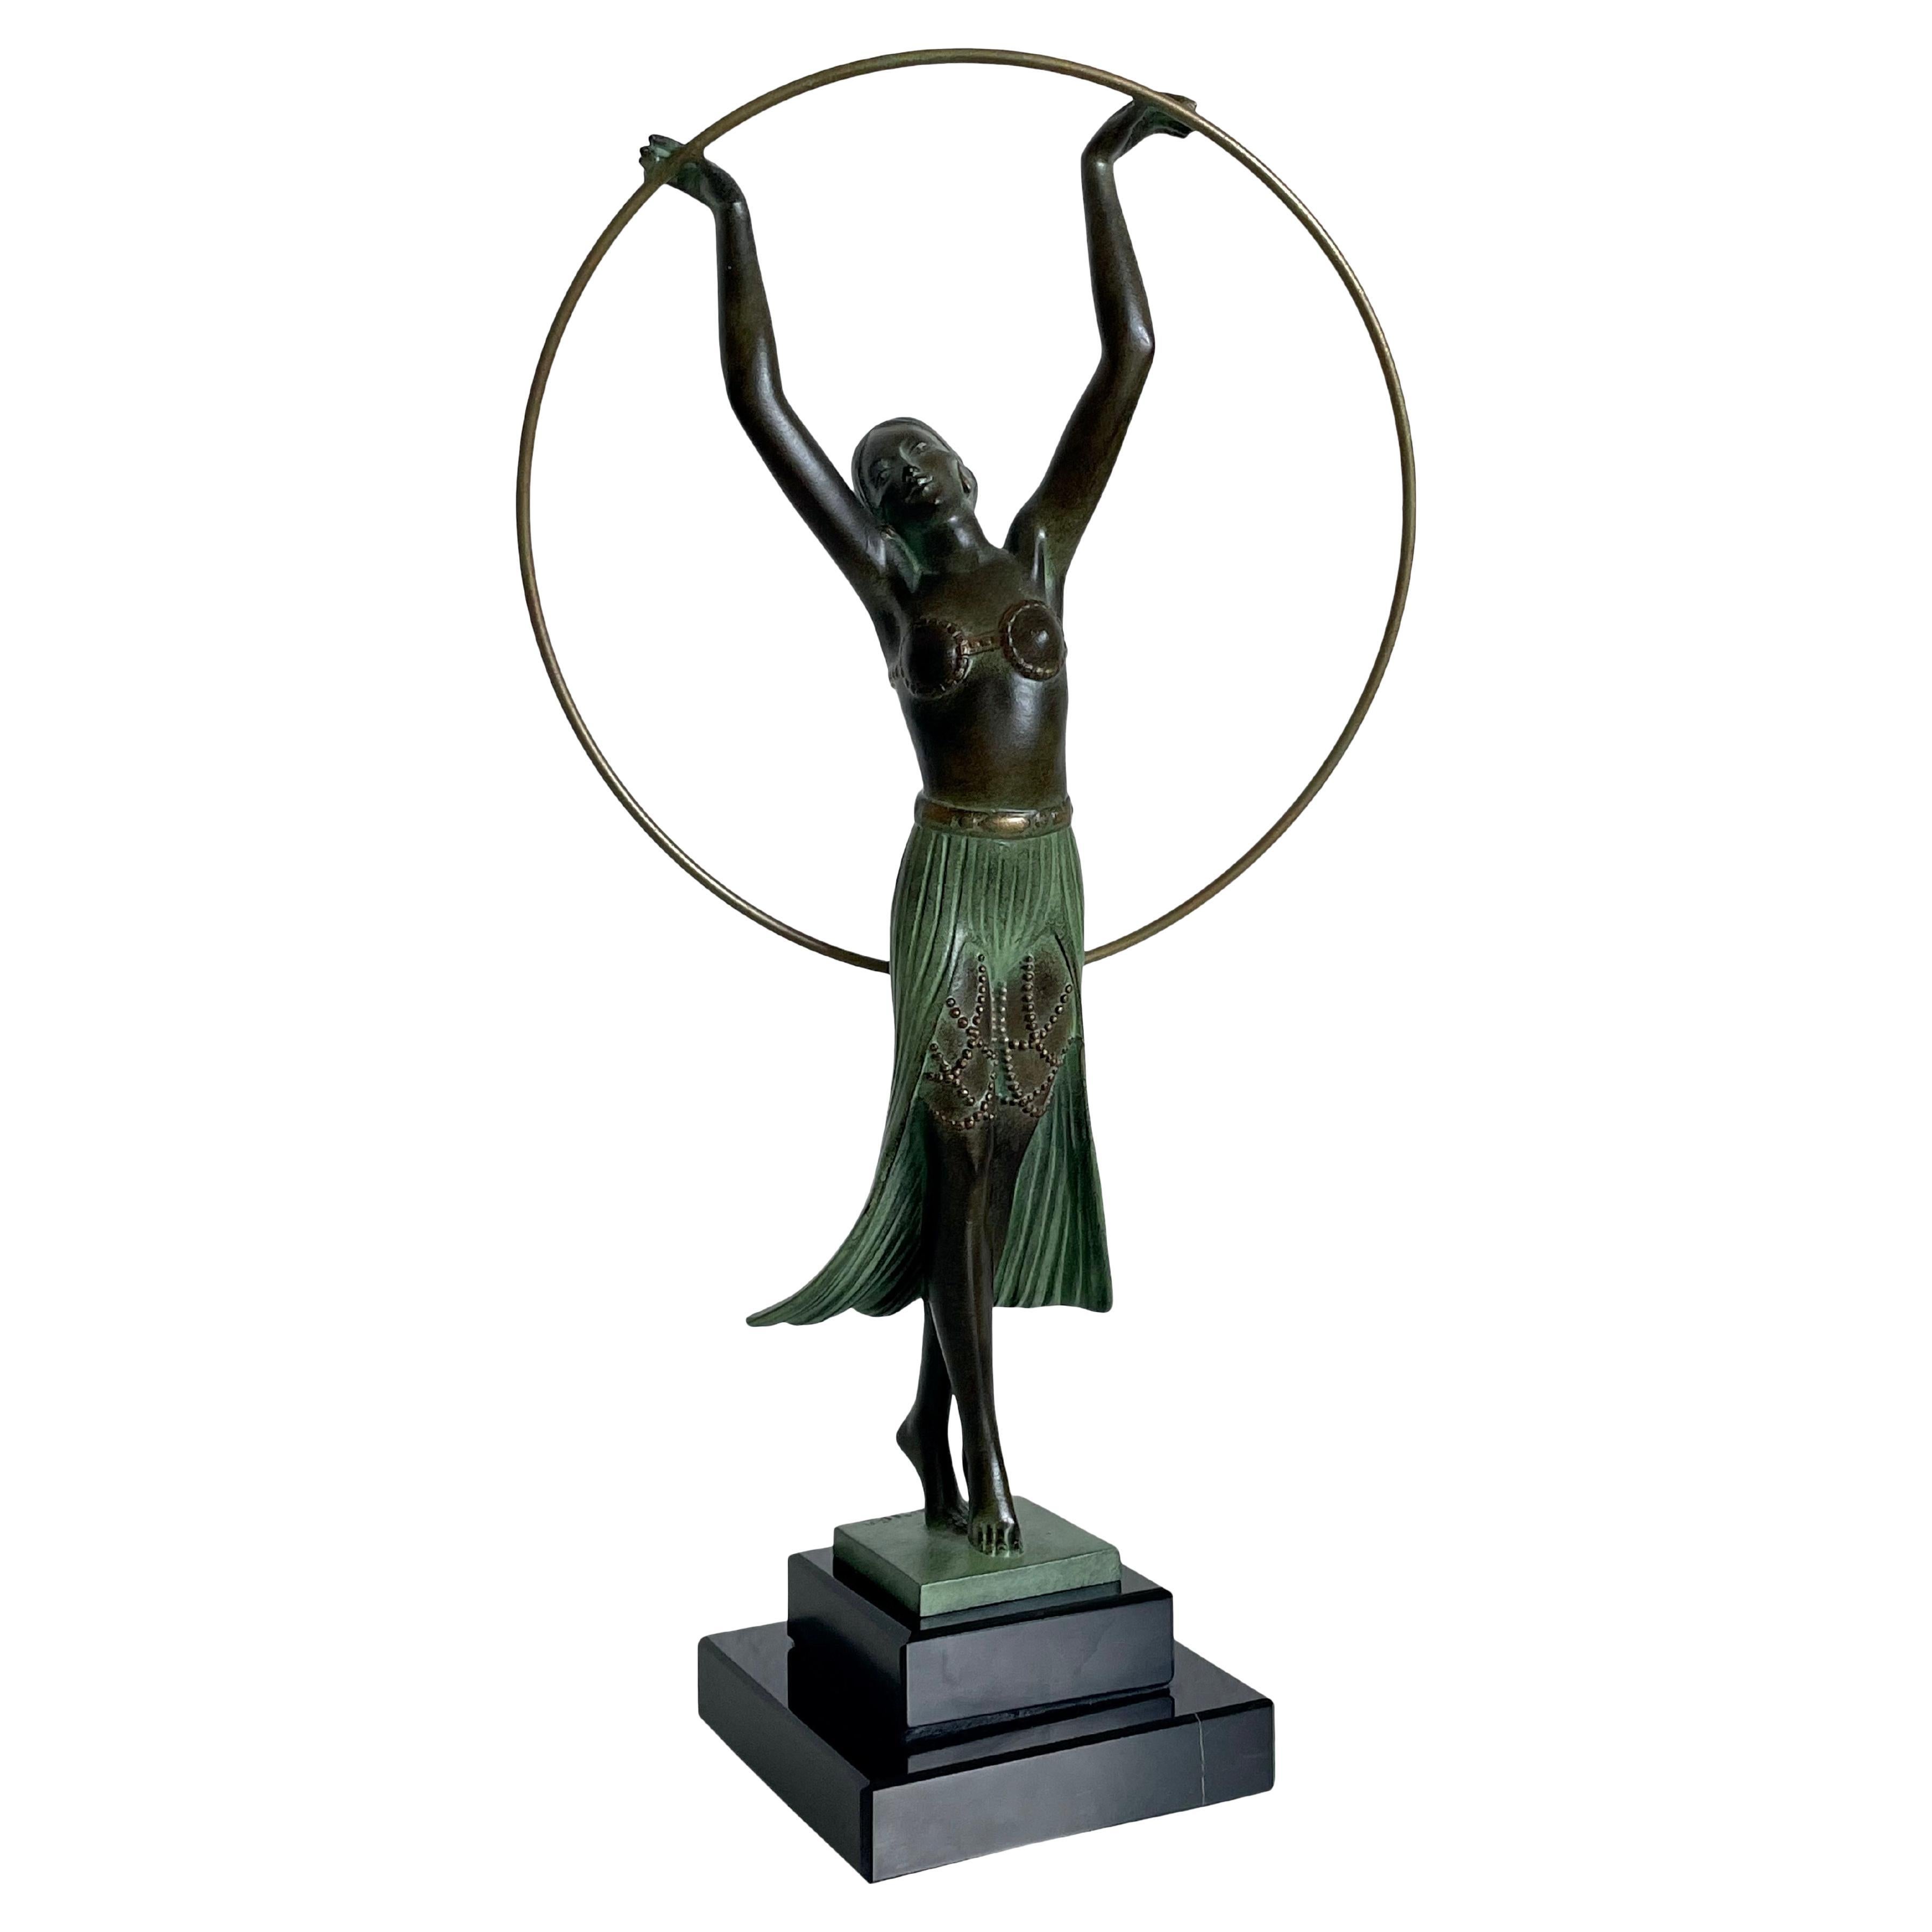 Bayadère Dancer Sculpture in Art Deco Style by Charles for Max Le Verrier